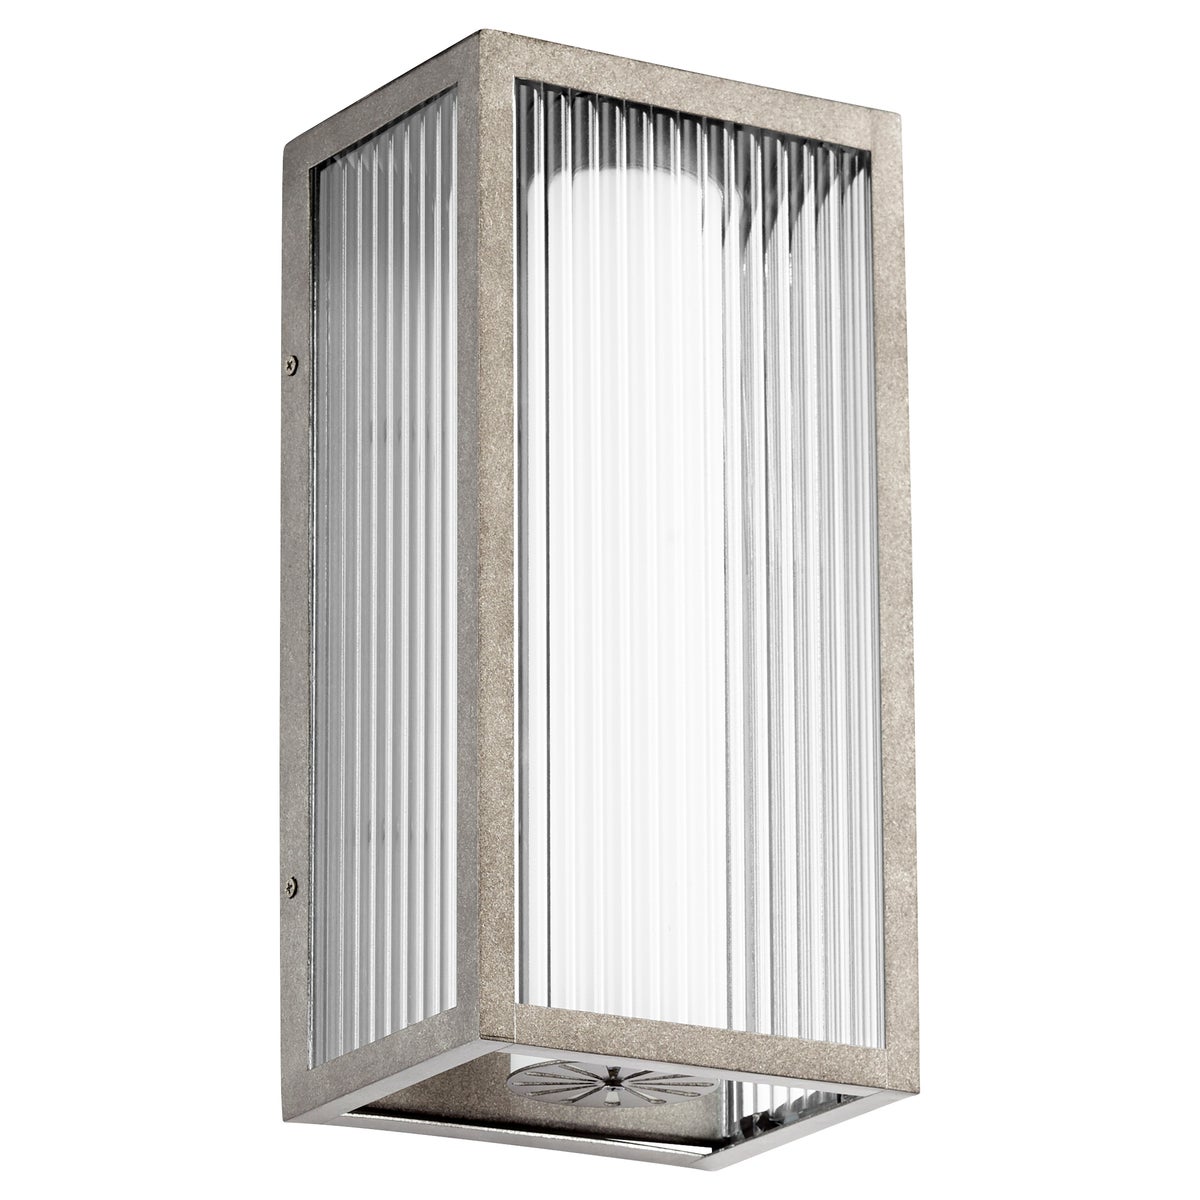 Outdoor Modern Wall Light with frosted shade housed inside clear fluted glass exterior, providing updated look and functional beauty to your outdoor ensemble. 3 efficient, dimmable LED light sources. Noir finish. 7.25&quot;W x 14.75&quot;H x 5.75&quot;E. UL Listed, Wet Location. 2-year warranty.